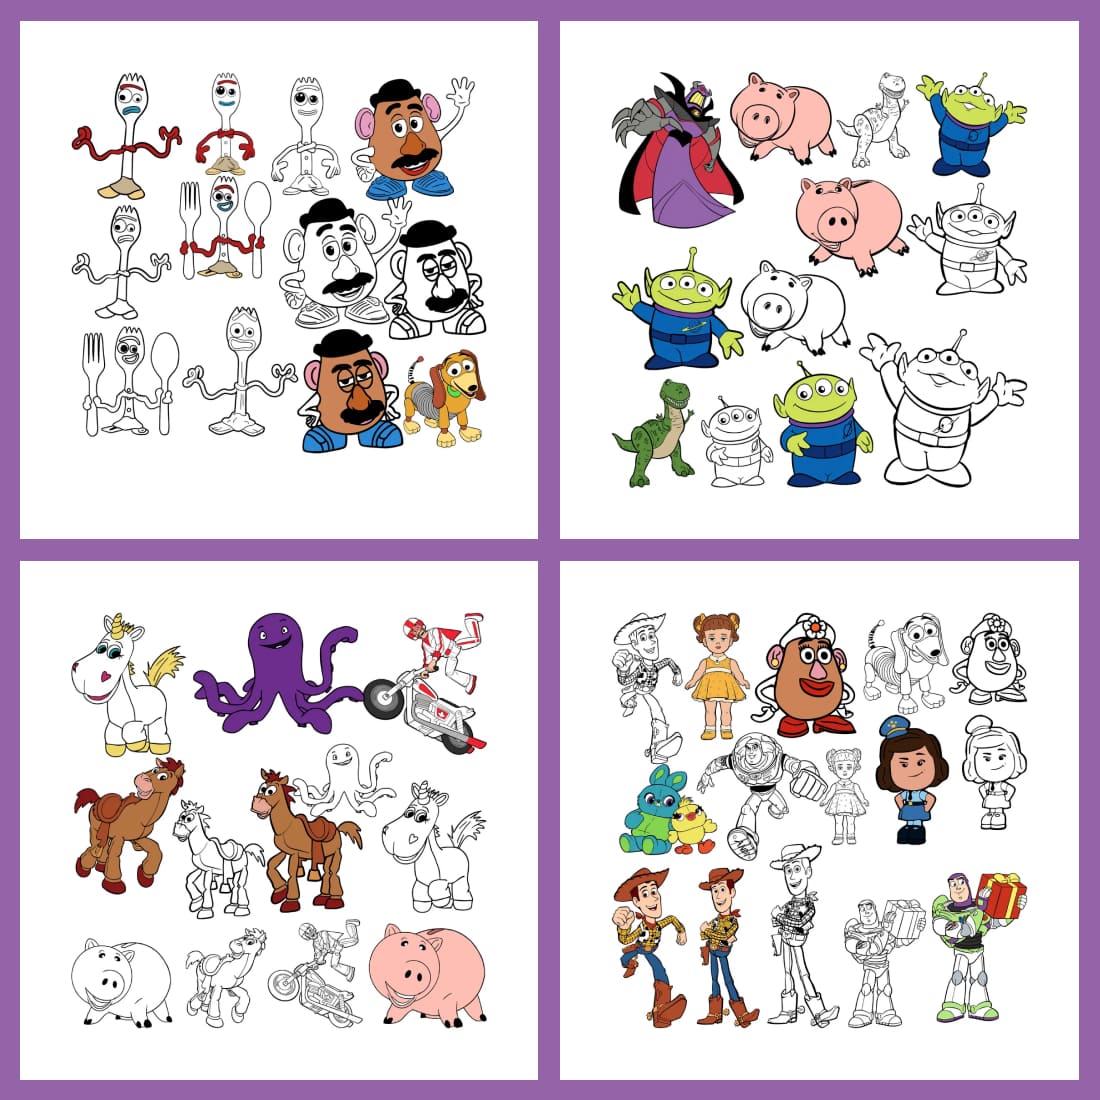 65 Toy Story Bundle SVG for Cricut and Silhouette Cutting Machines cover.